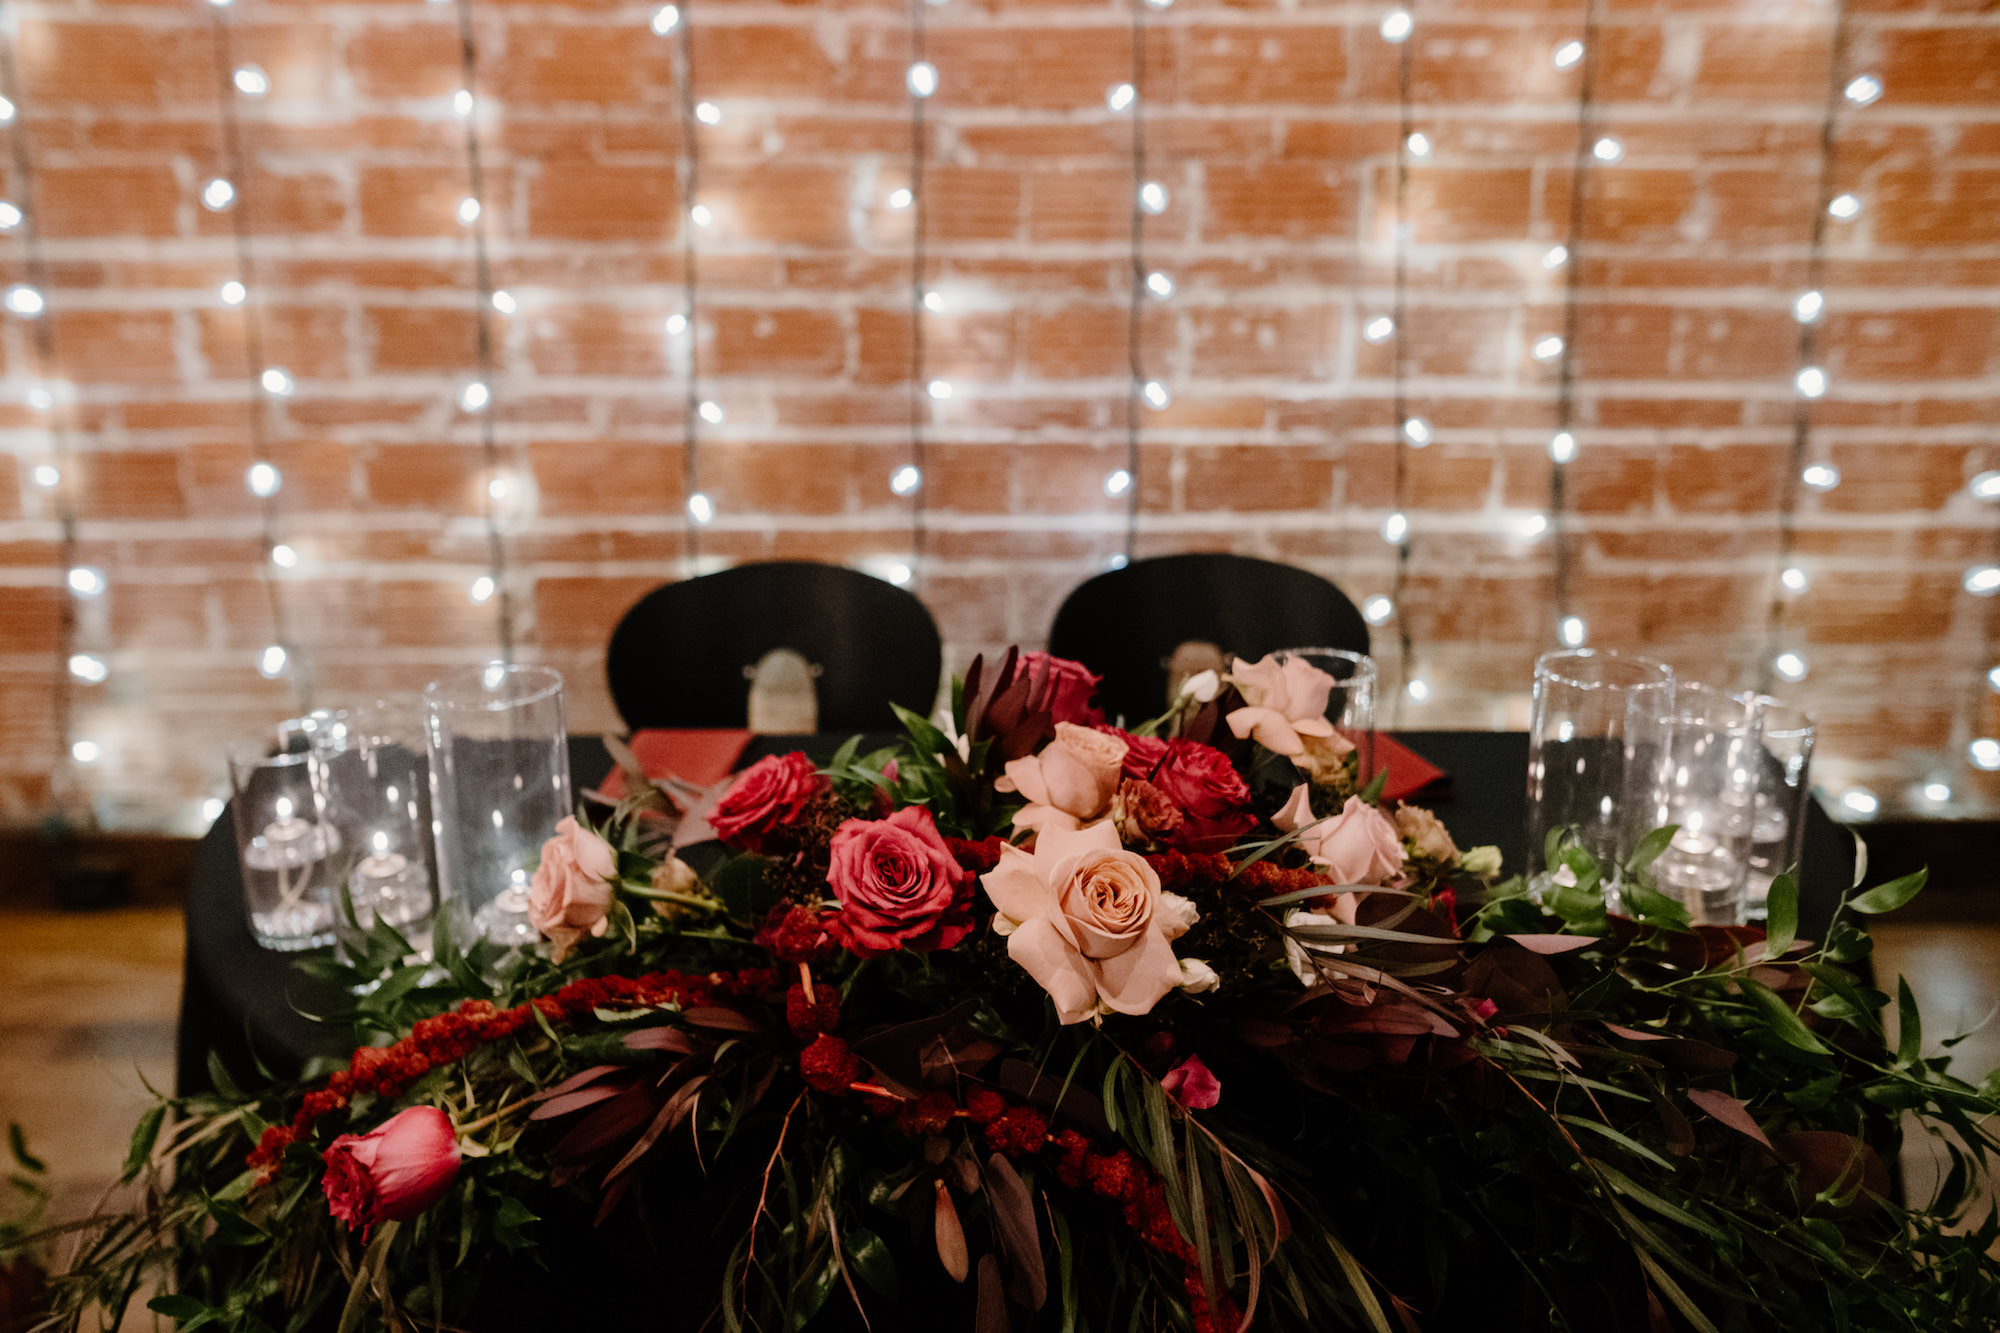 Dark and Moody Sweetheart Head Table with Edgy Floral Arrangements | Hanging Market Lights Backdrop | Romantic Goth Wedding Inspiration